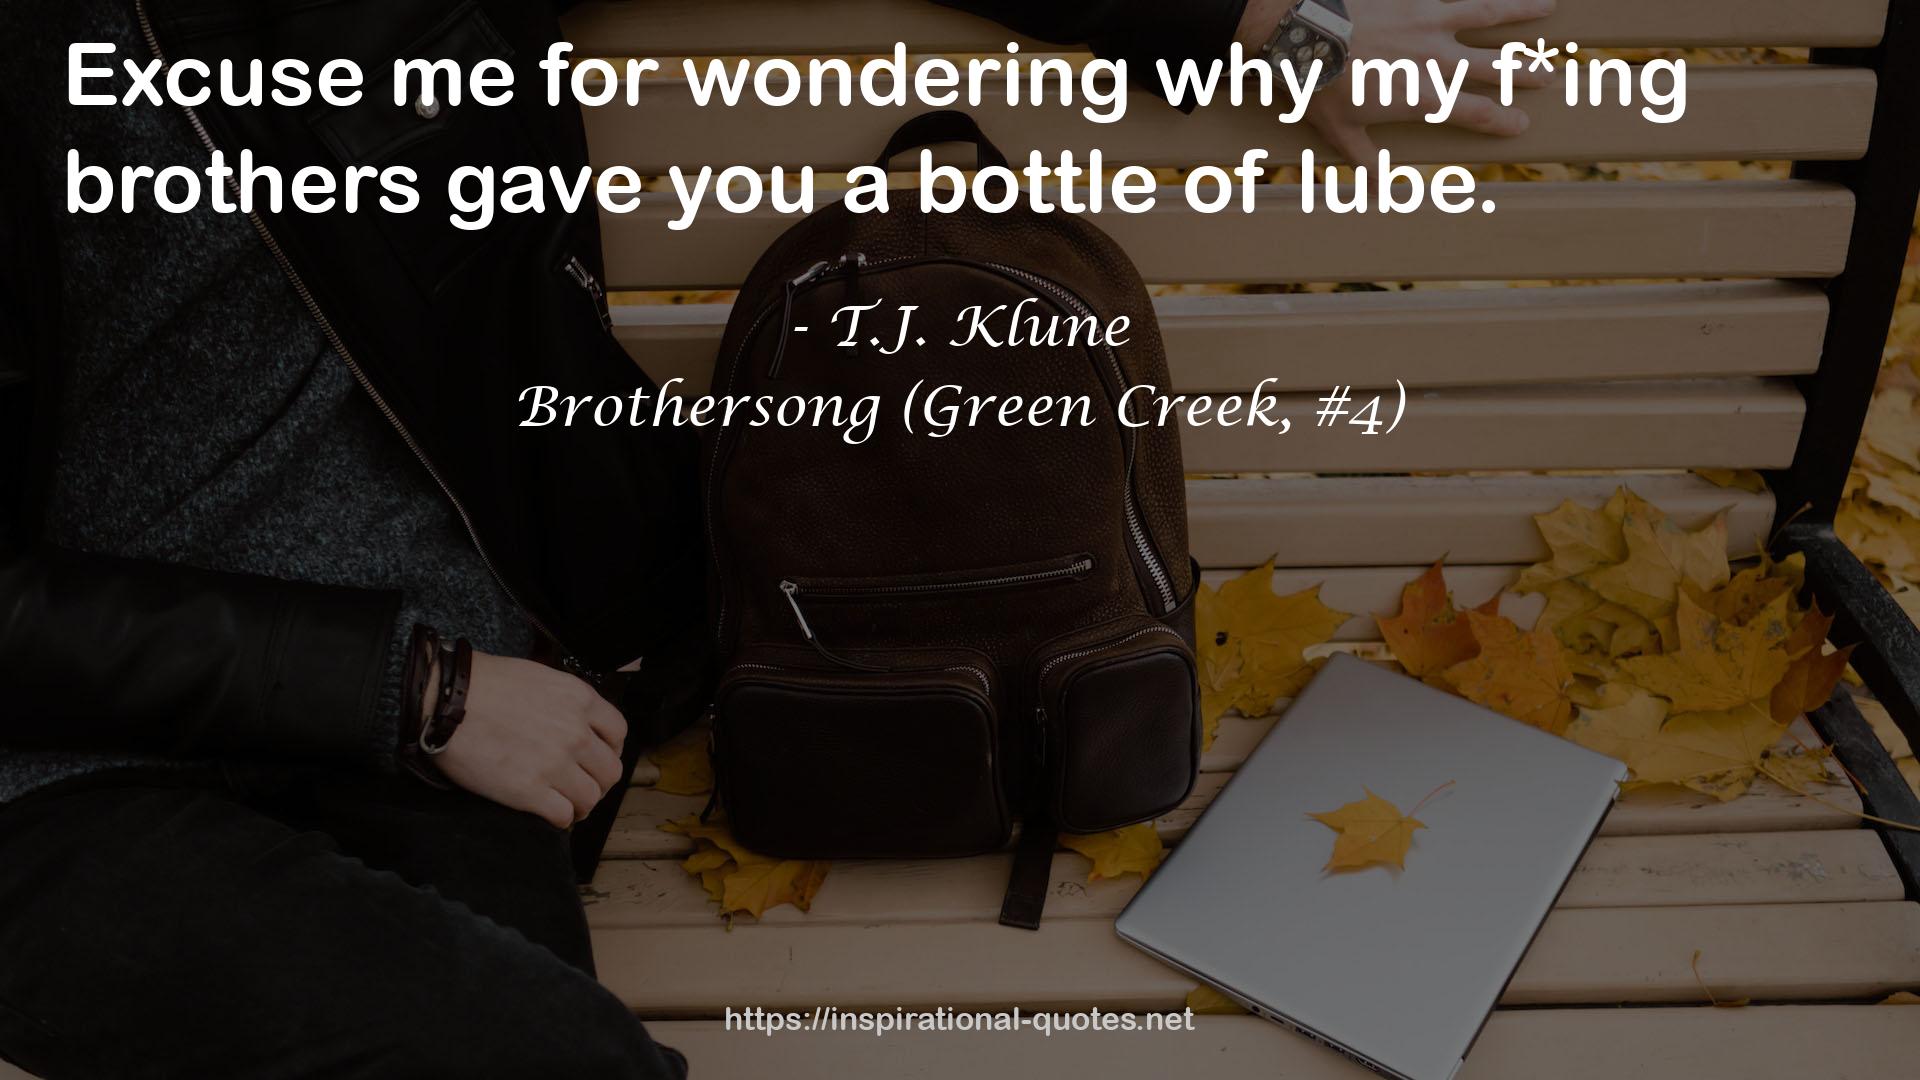 Brothersong (Green Creek, #4) QUOTES